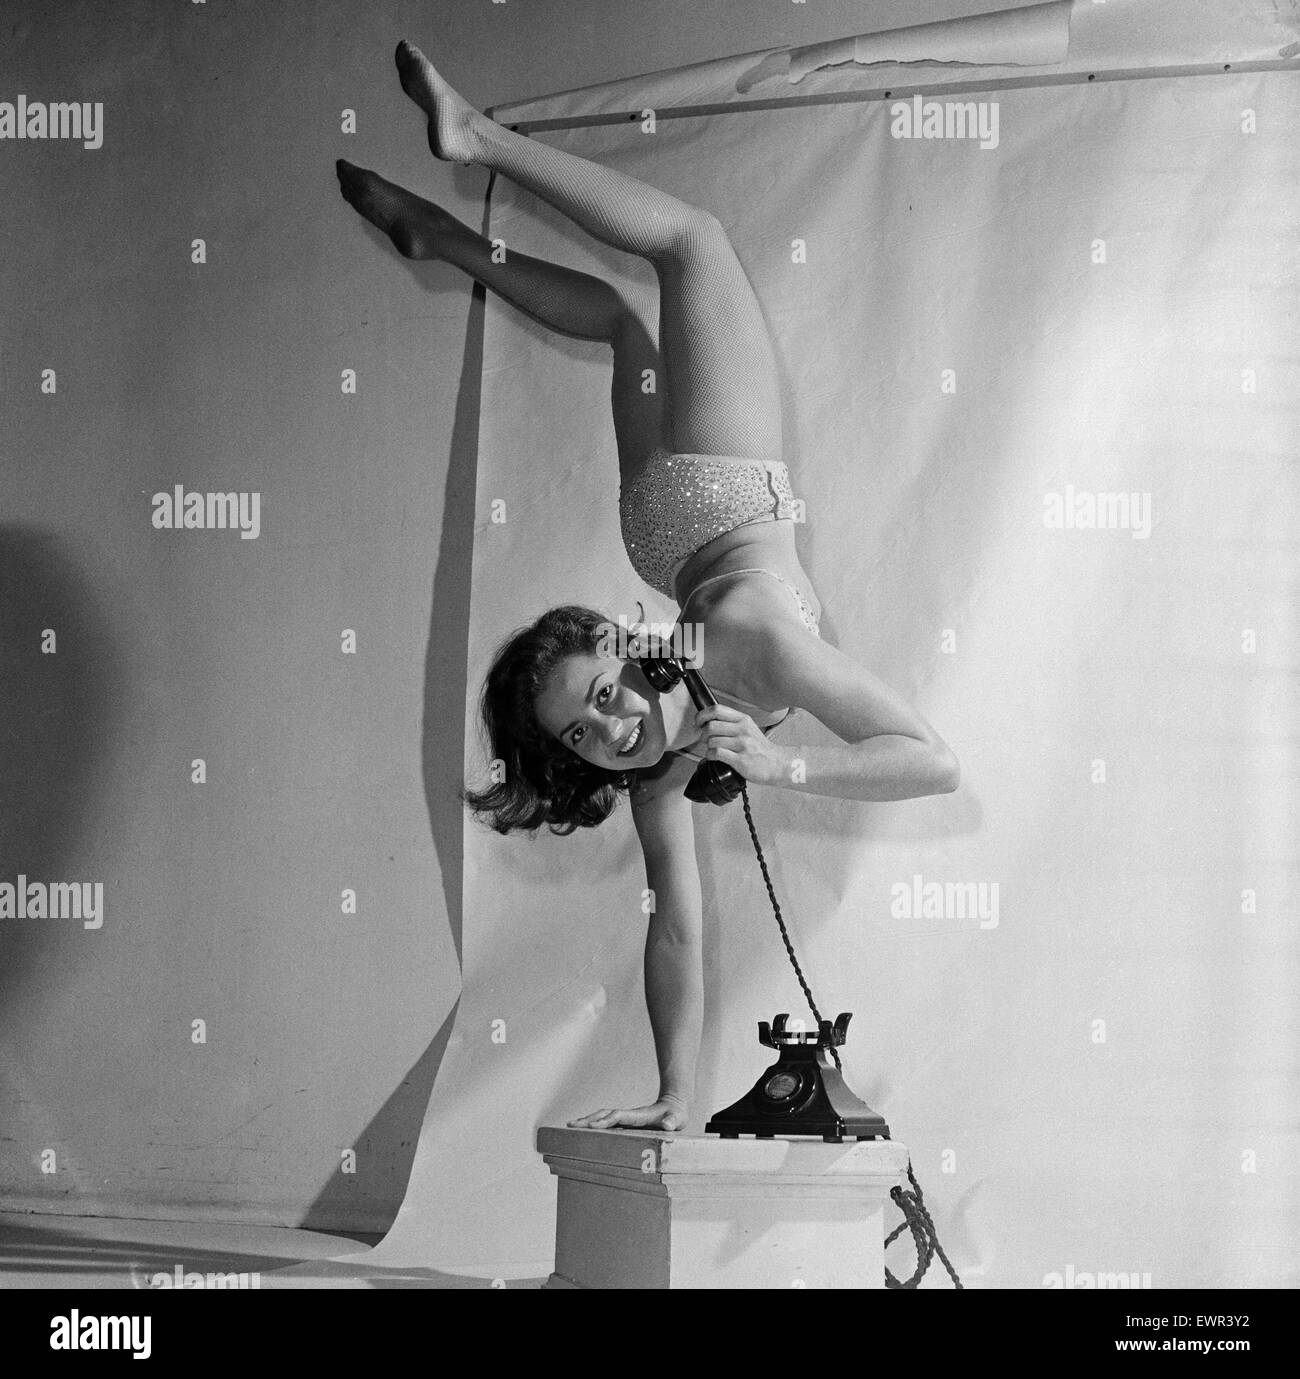 18 year old Eleanor Gunter is an equilibrist, an acrobat who performs balancing feats. Balancing on one hand using a telephone. She's in the UK to appear at the Glasgow Empire theatre, 1st September 1957. Stock Photo